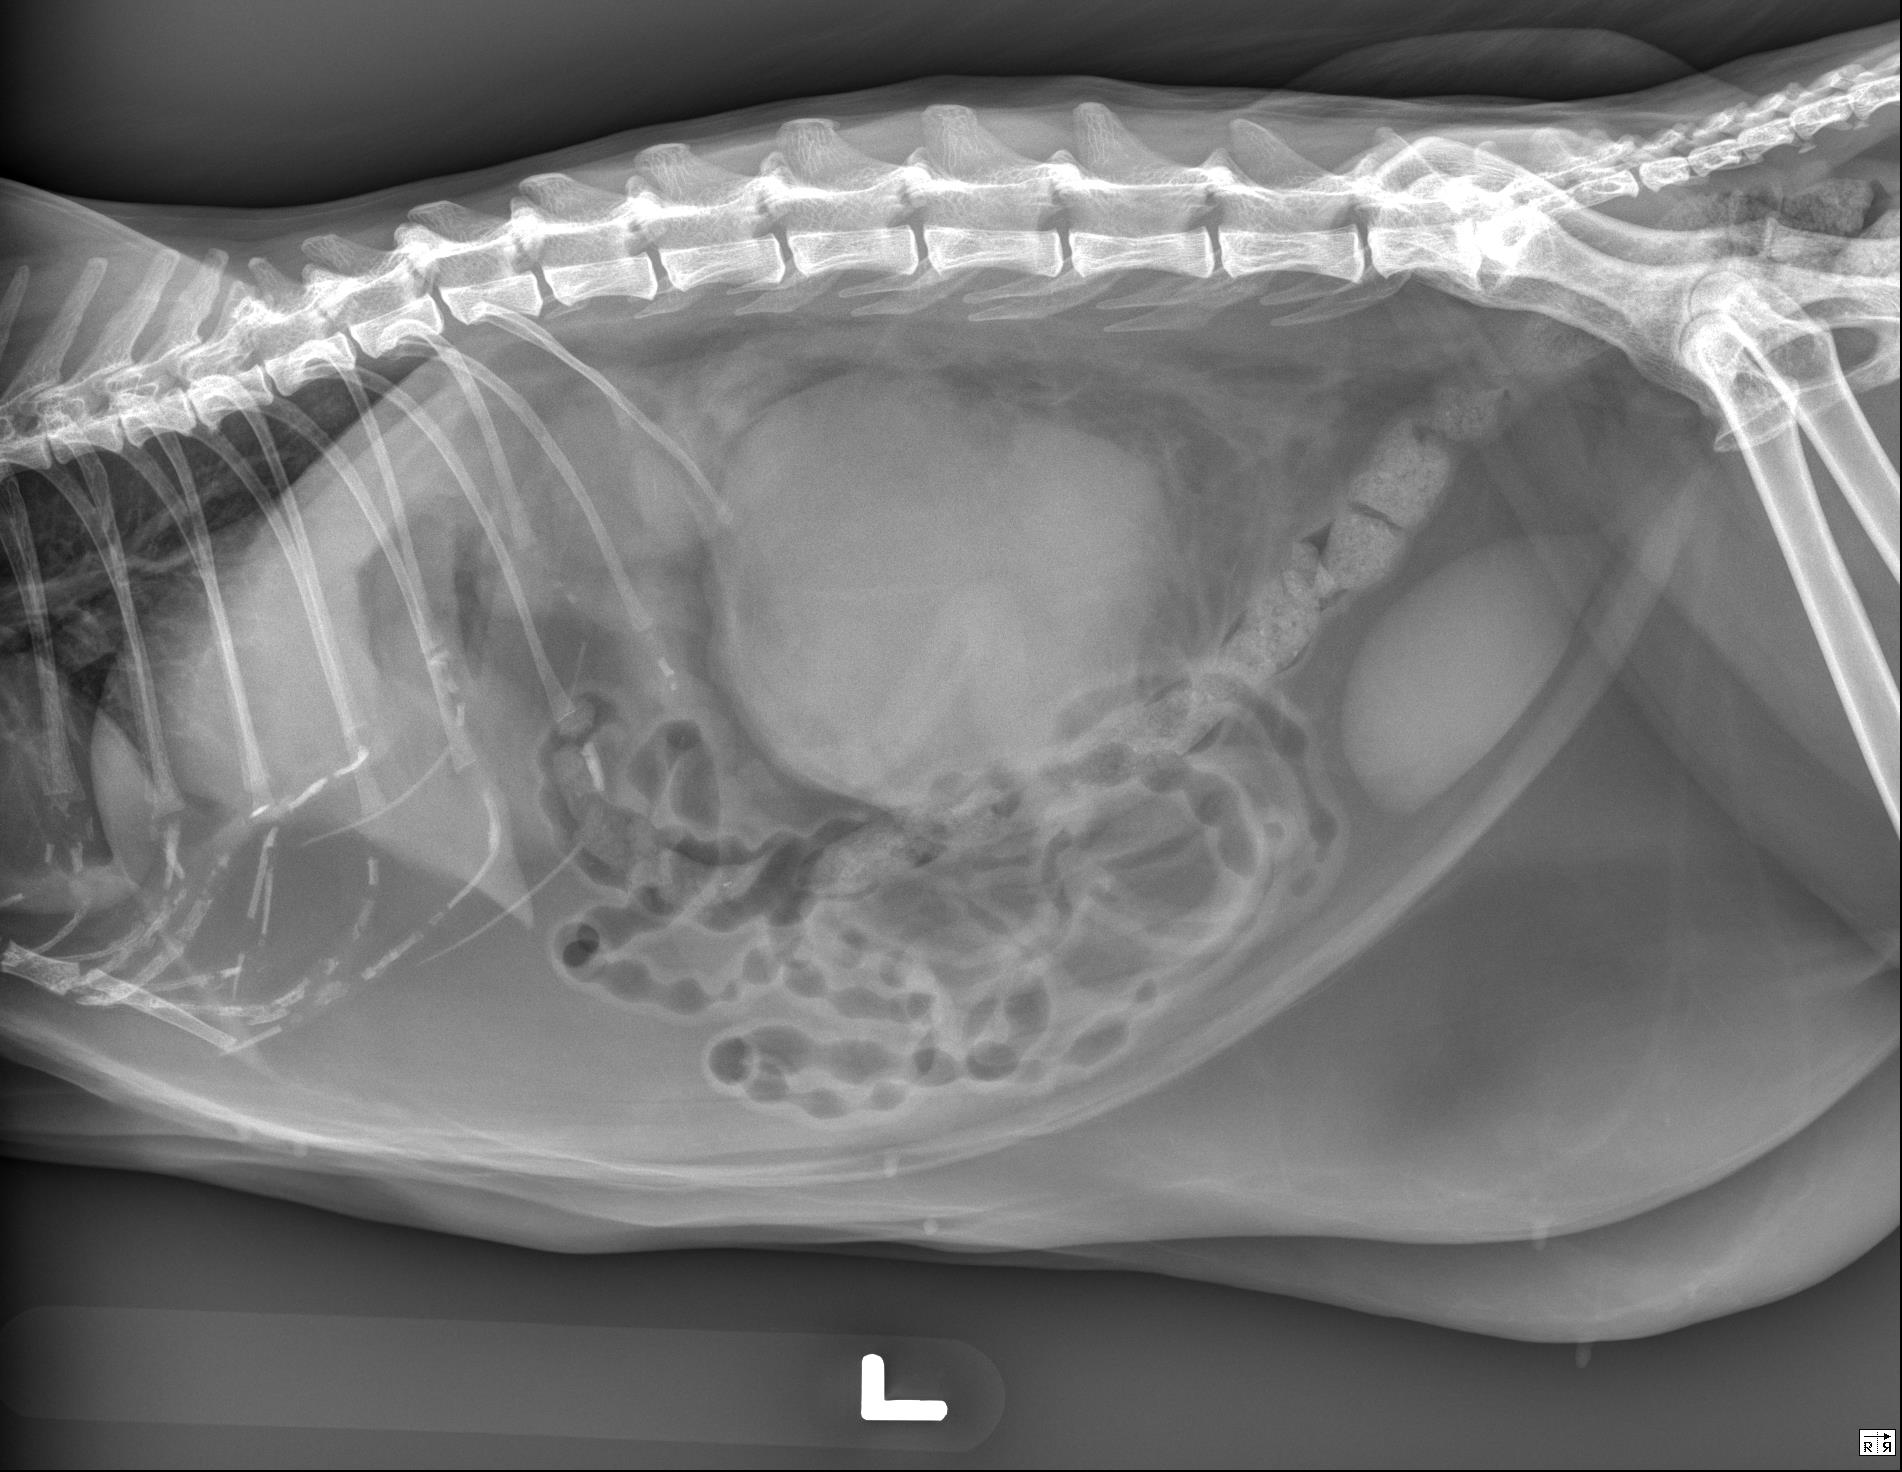 Veterinary Radiology On Twitter Hello Everybody The Case Of The Week Is A 12 Year Old Cat